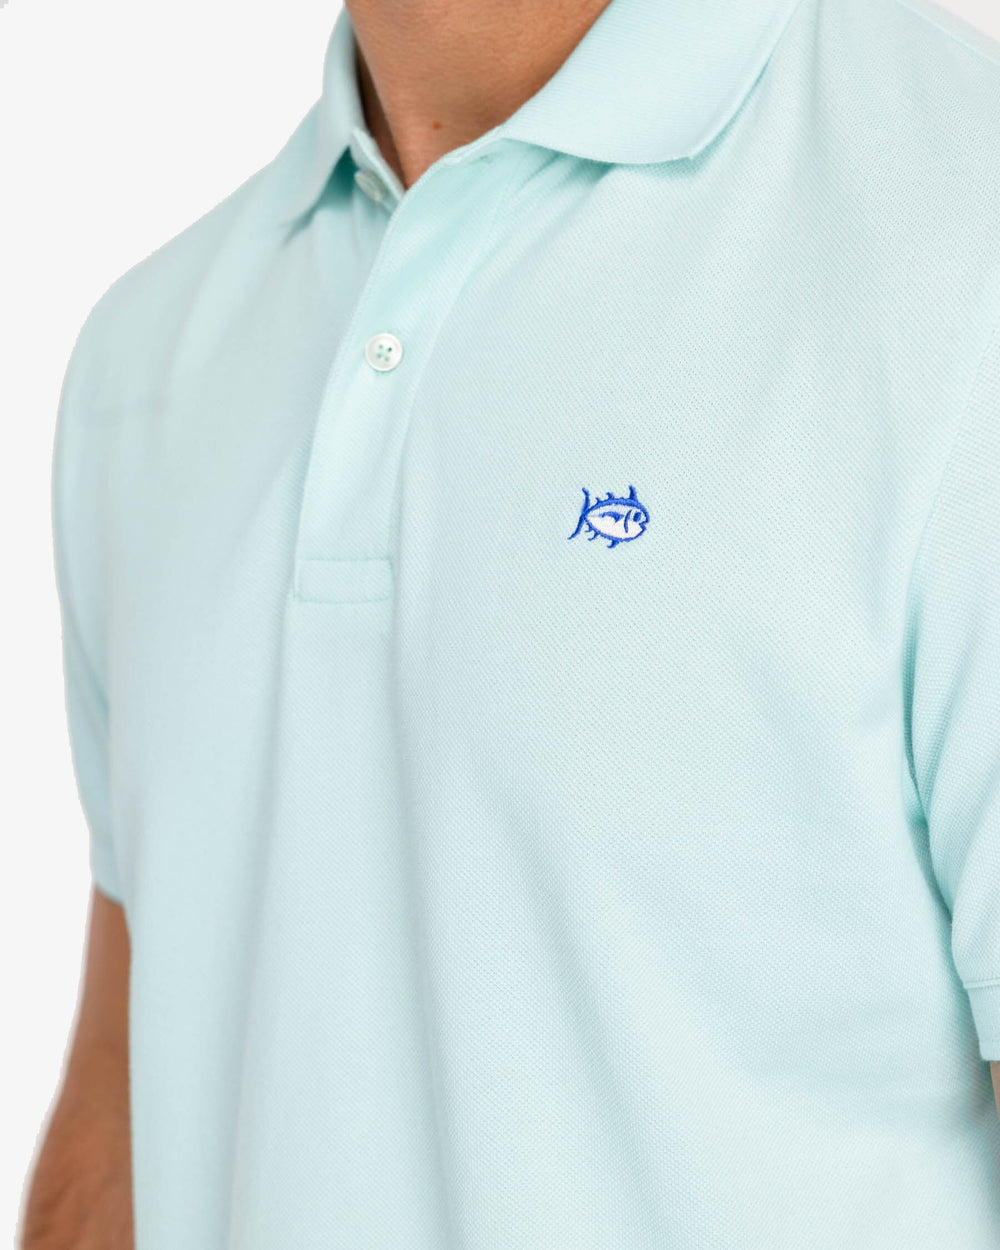 The model detail view of the Men's New Skipjack Polo Shirt by Southern Tide - Baltic Teal